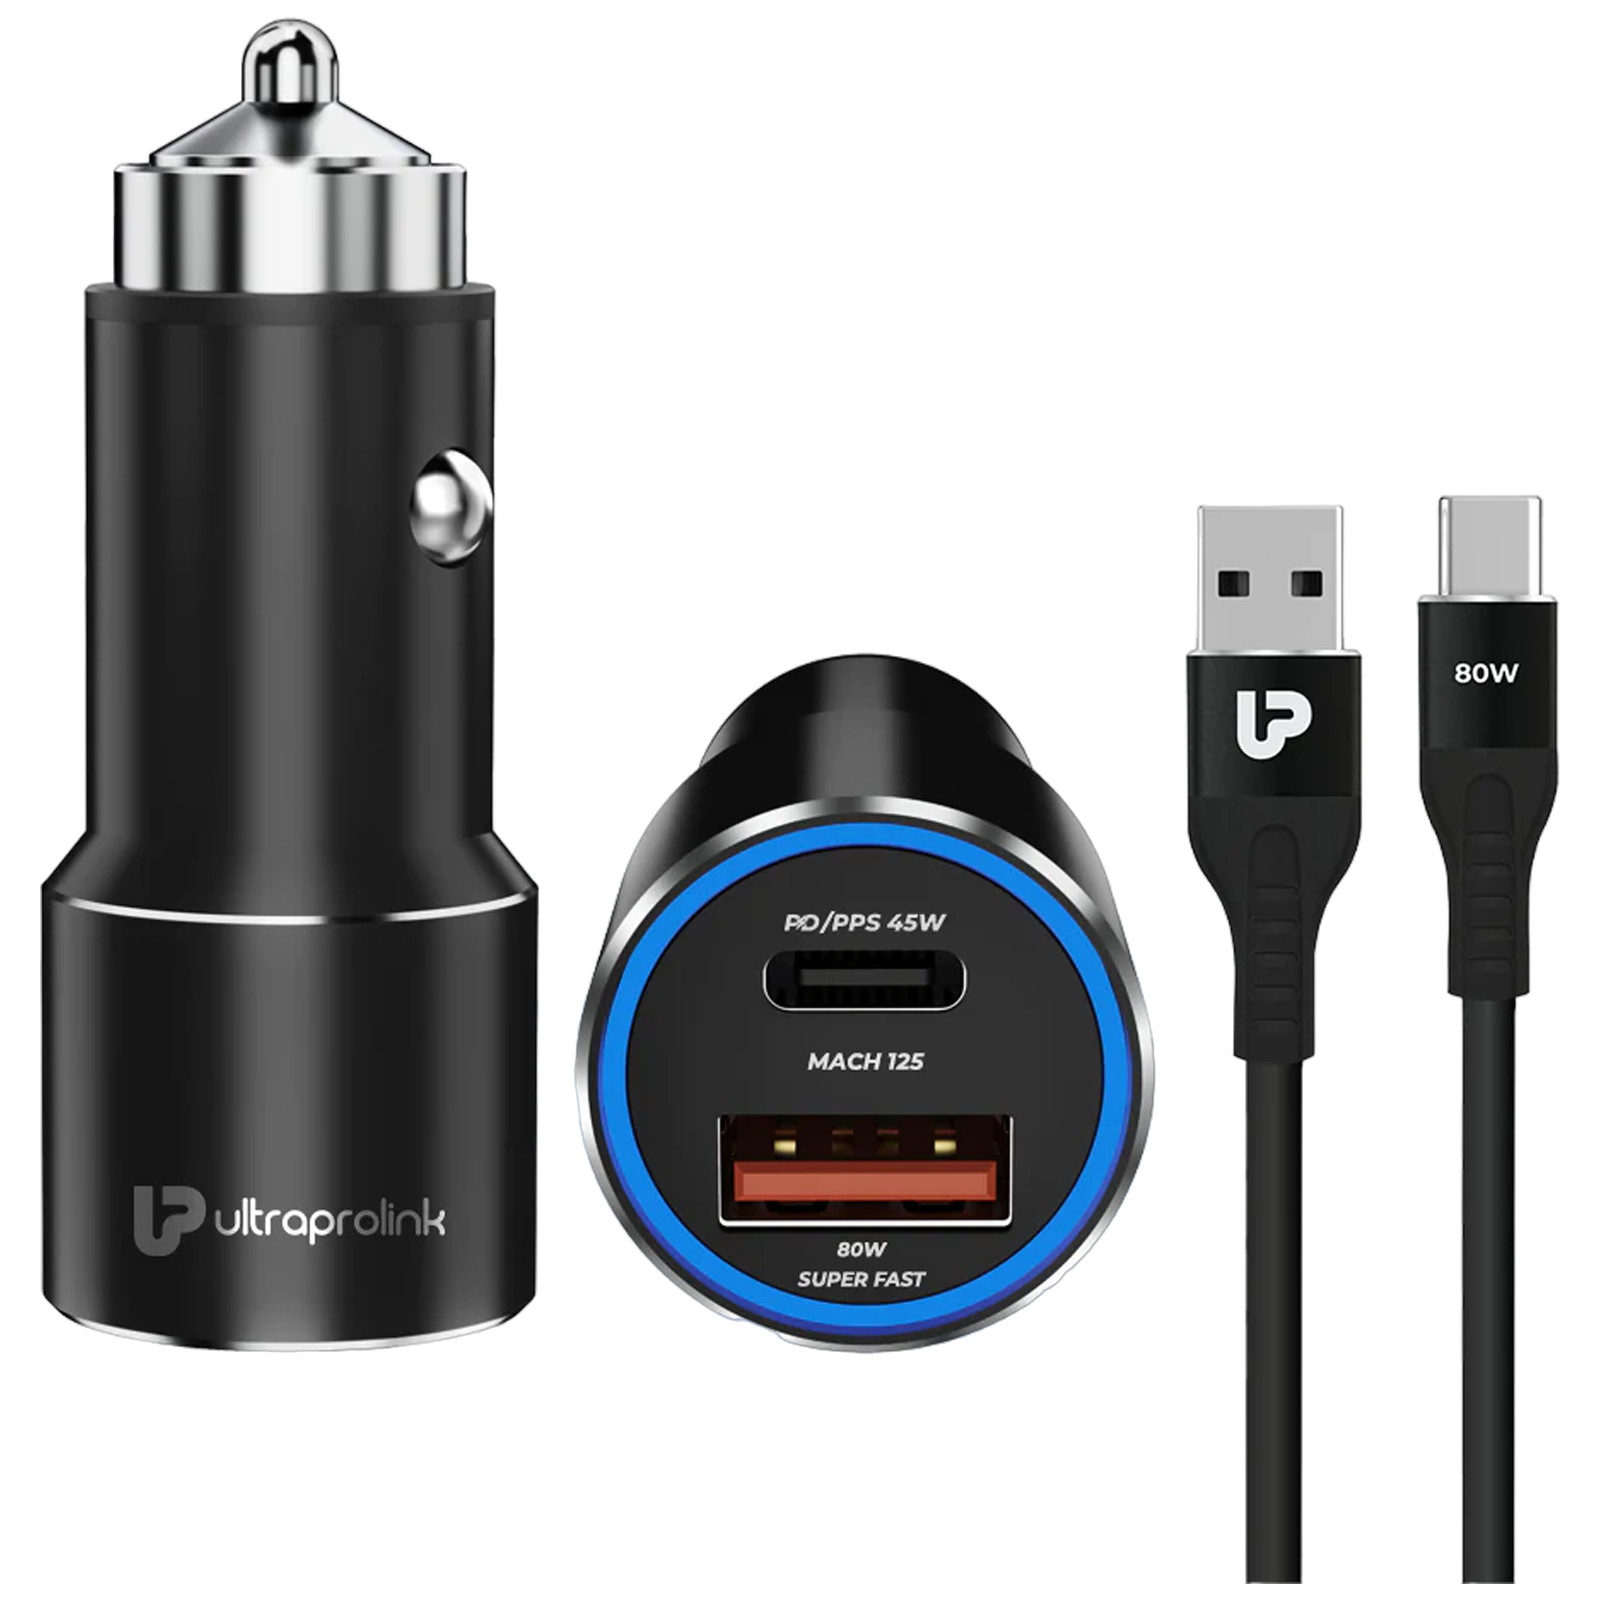 ultraprolink Mach 125 125 Watts 2 USB Ports Type C and Type A Car Charging Adapter with Cable (Multi Layer Protection, UM1160, Black)